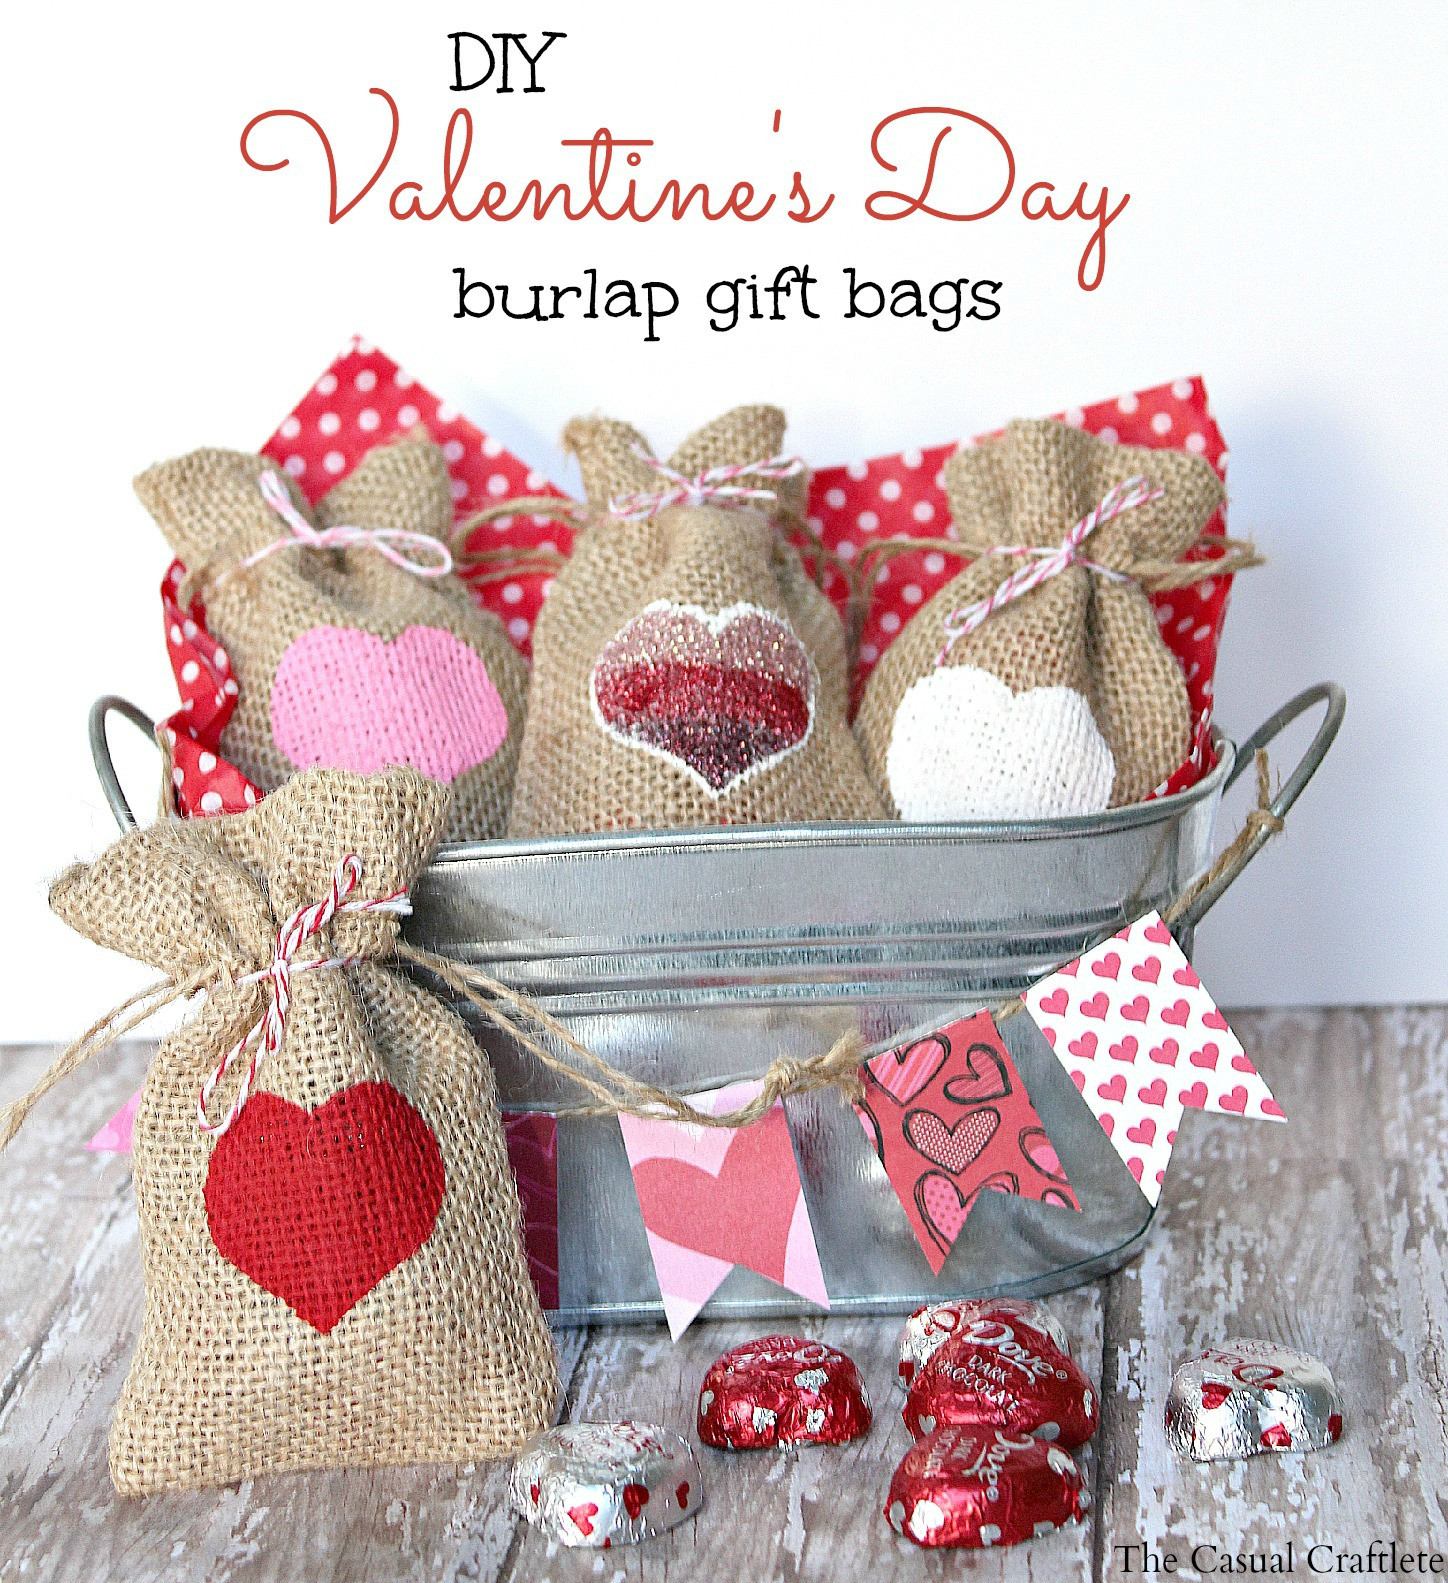 Valentines Day Diy Gift Beautiful Diy Valentine S Day Burlap Gift Bags